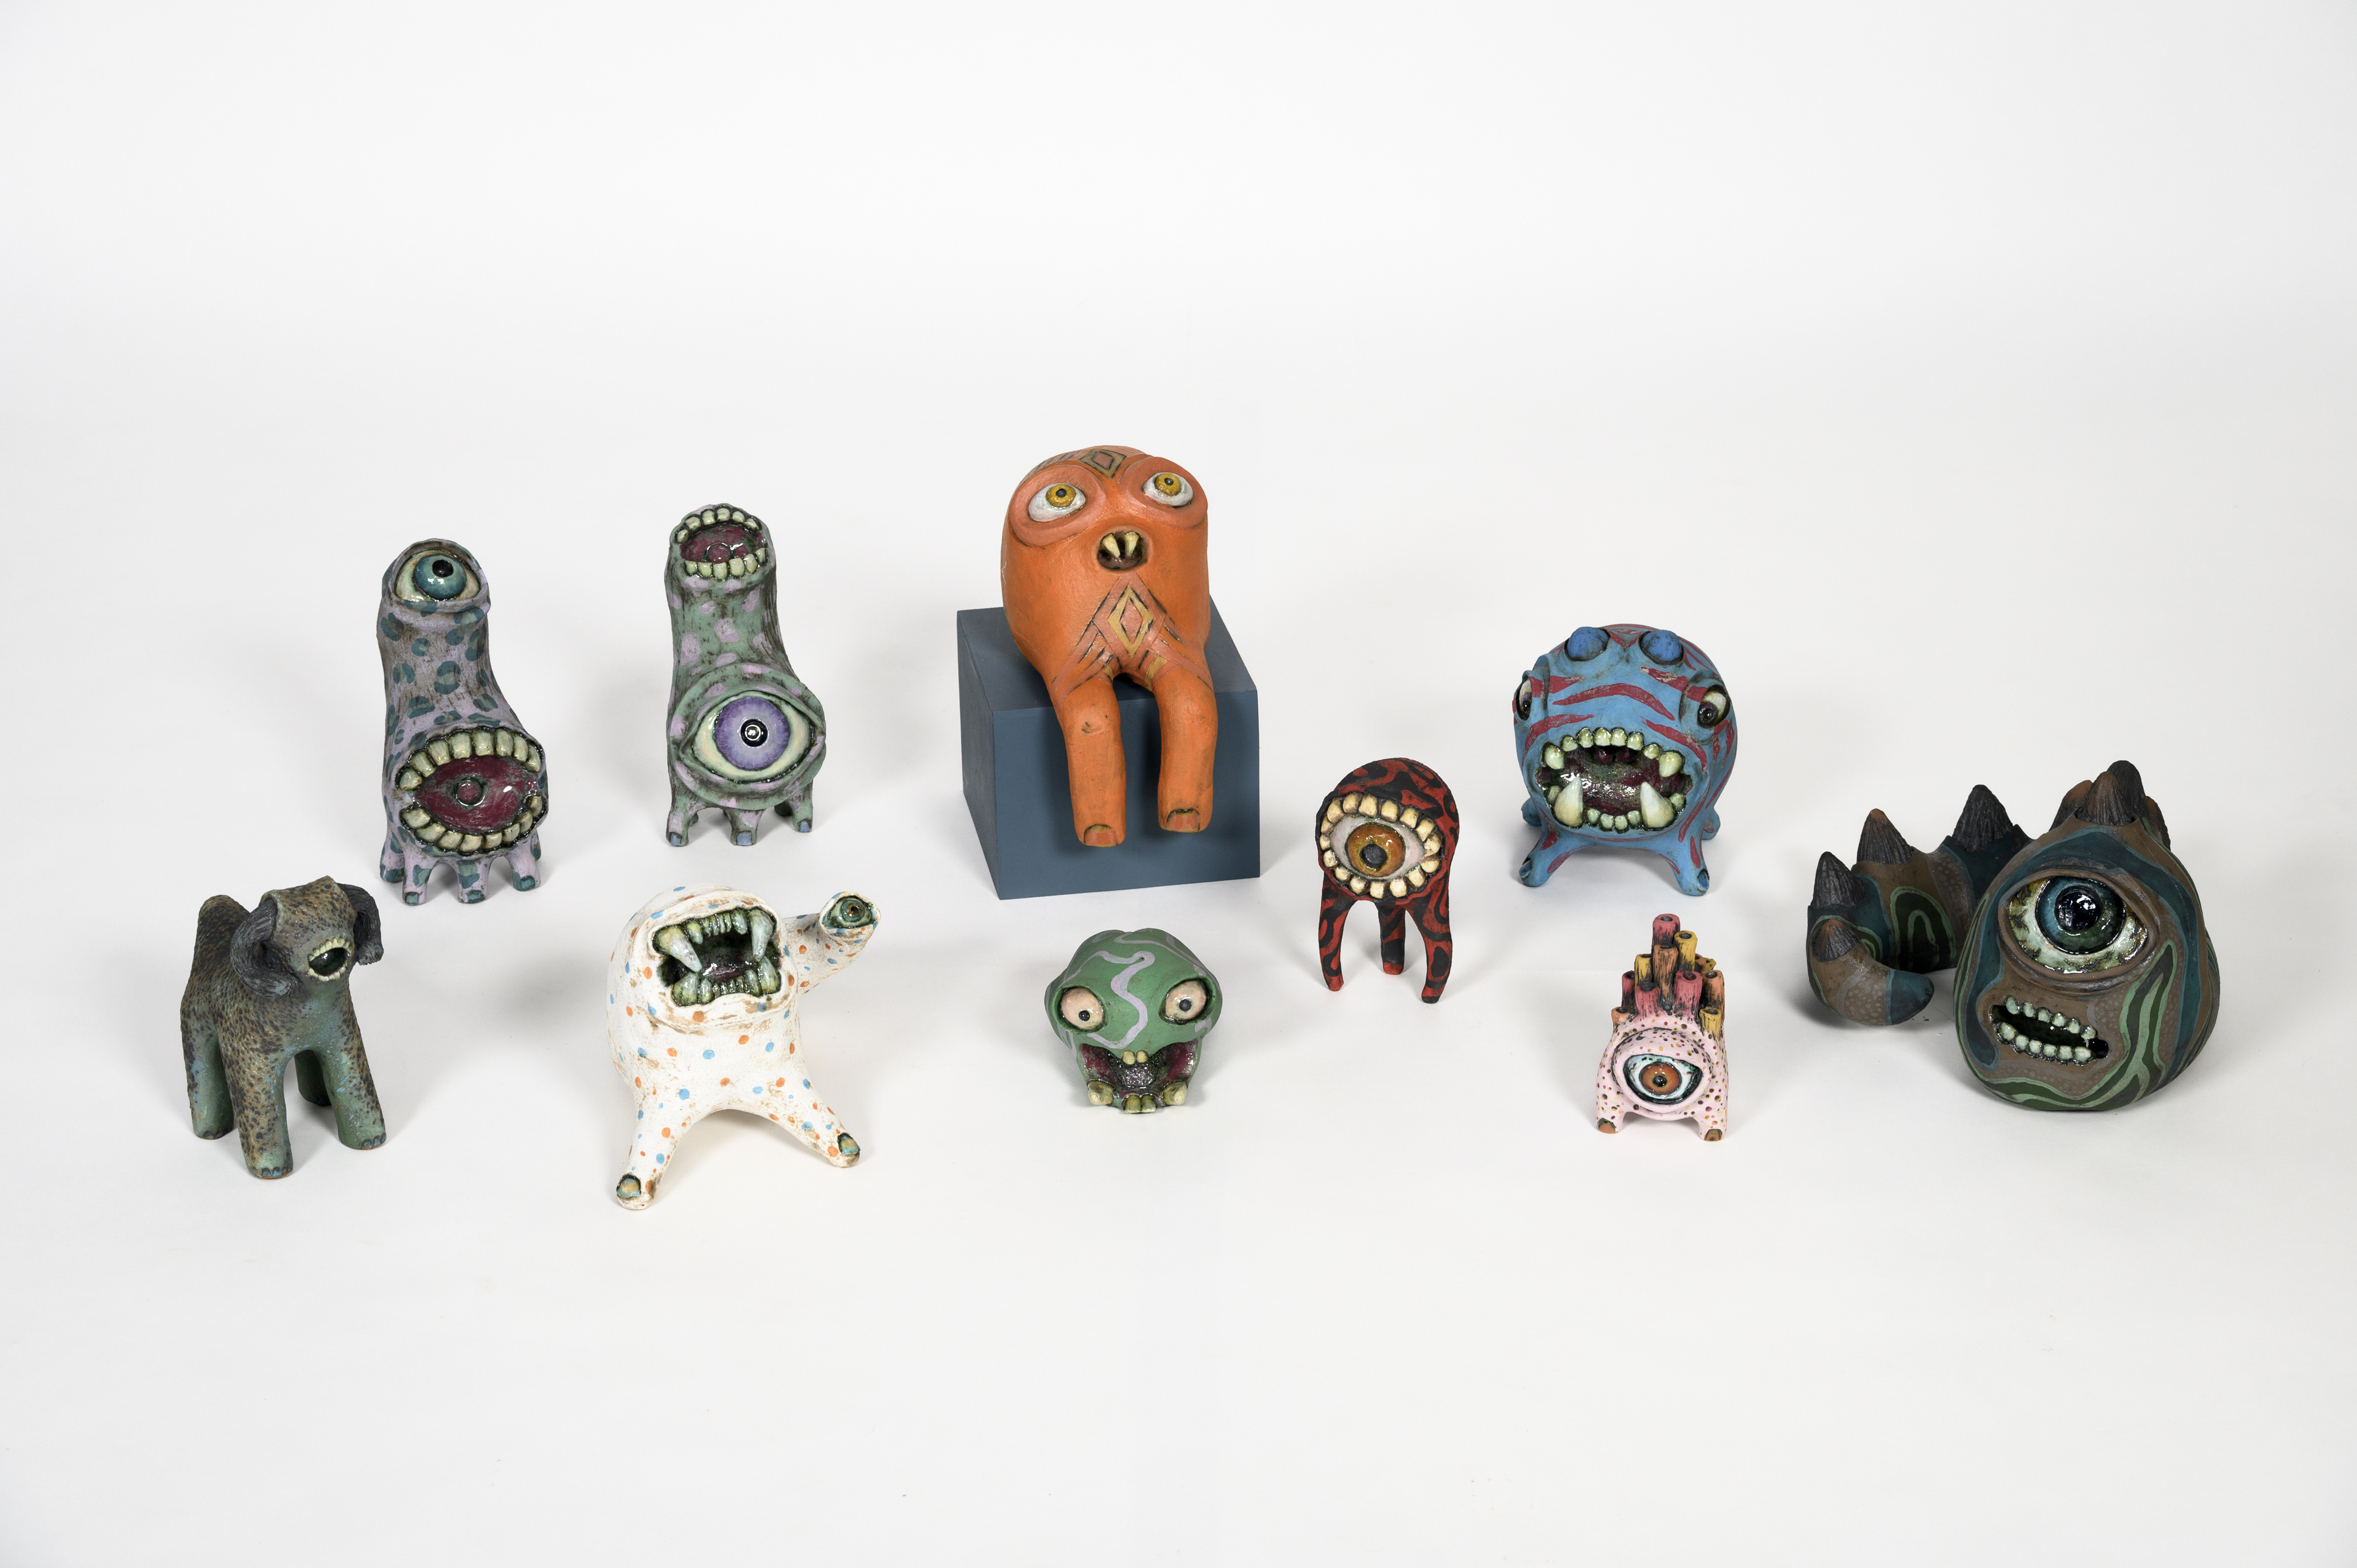 Ten colourful clay sculptures of monster-like characters.